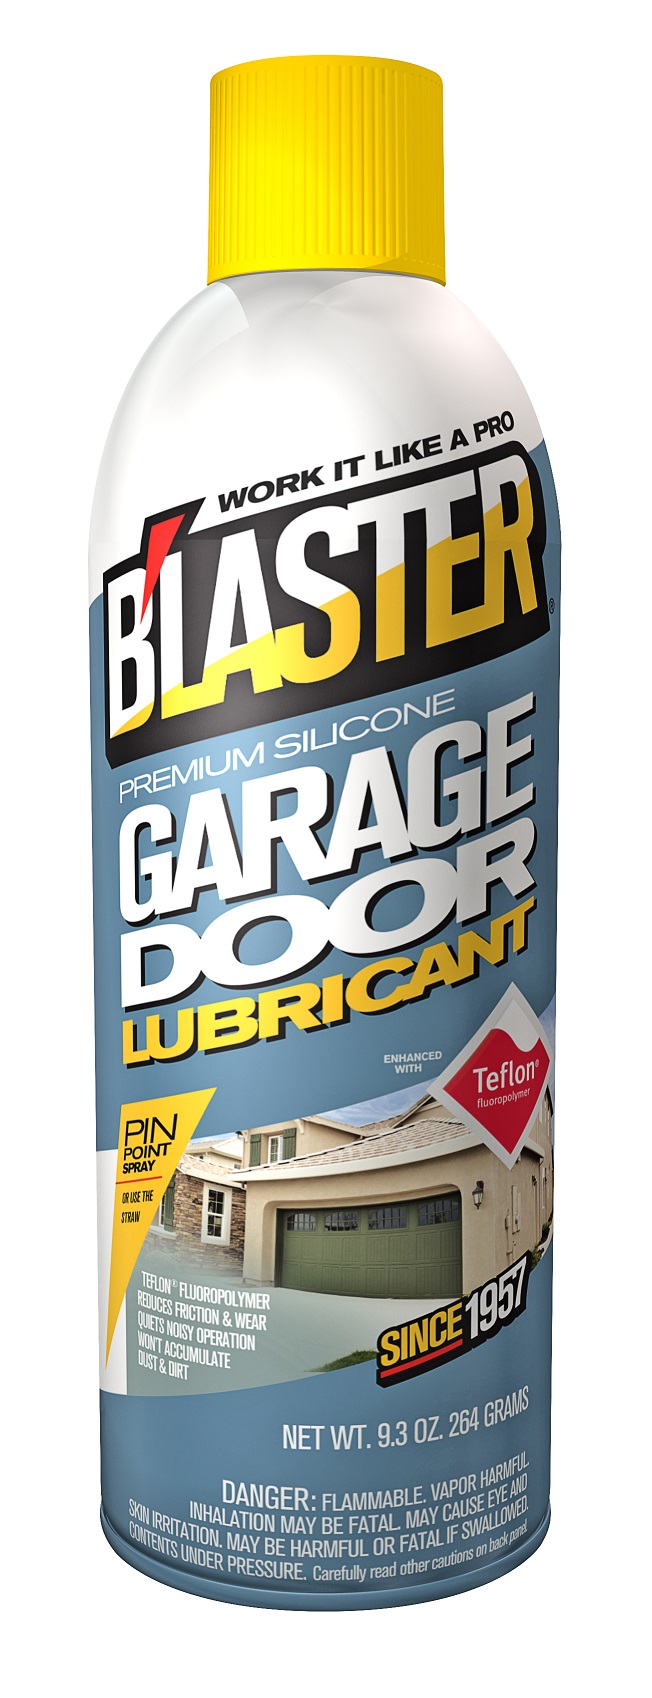 Modern What Is Garage Door Lubricant Made Of for Small Space